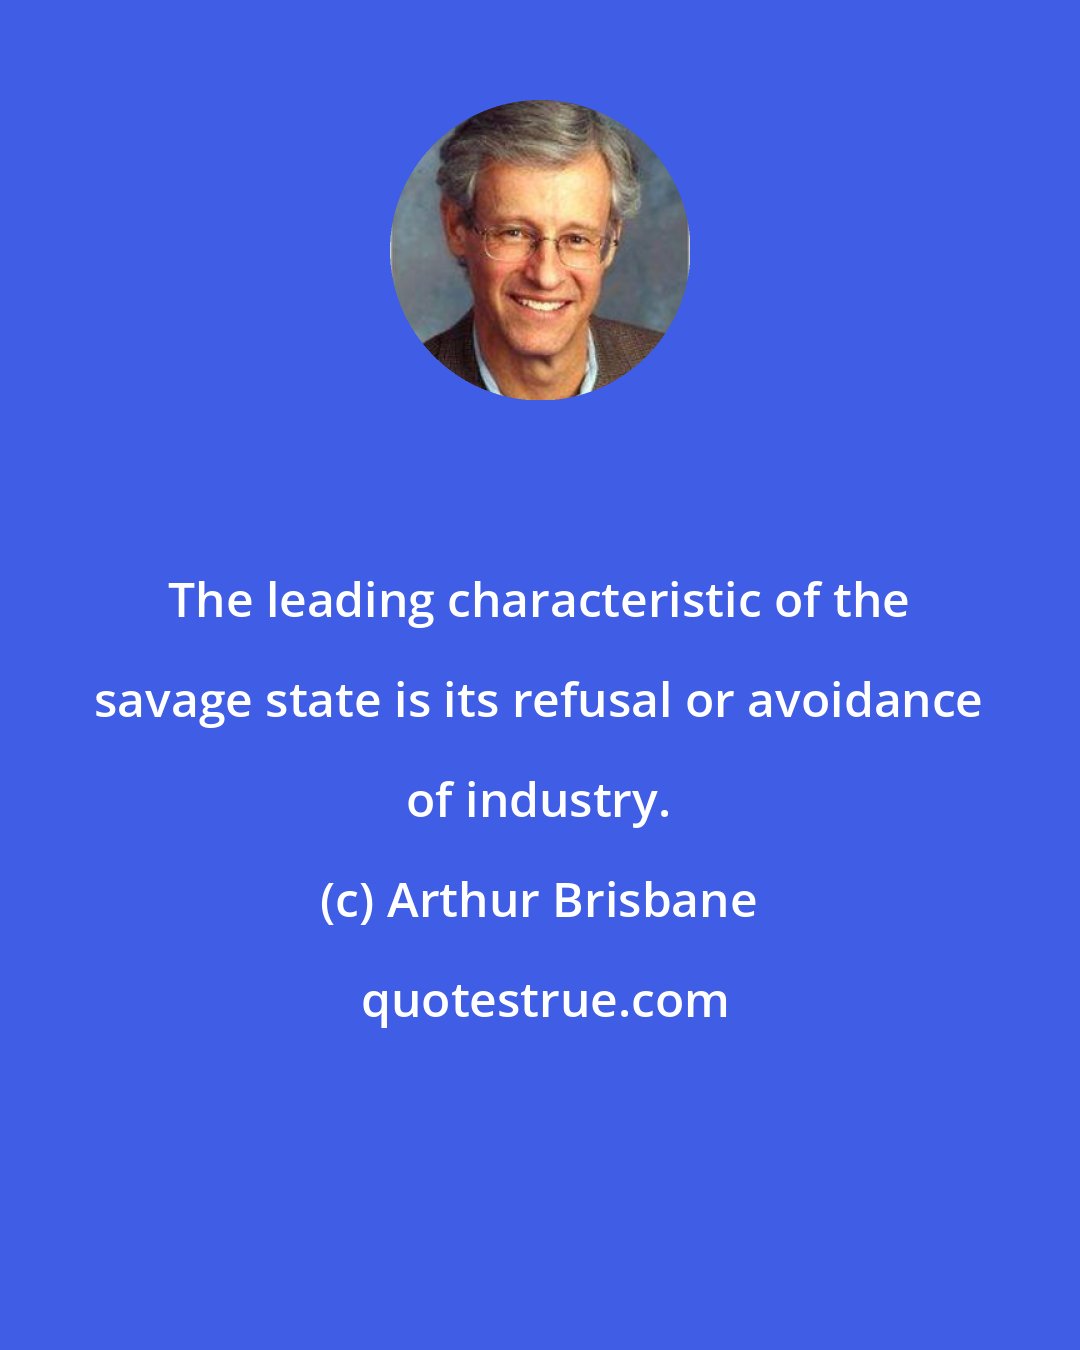 Arthur Brisbane: The leading characteristic of the savage state is its refusal or avoidance of industry.